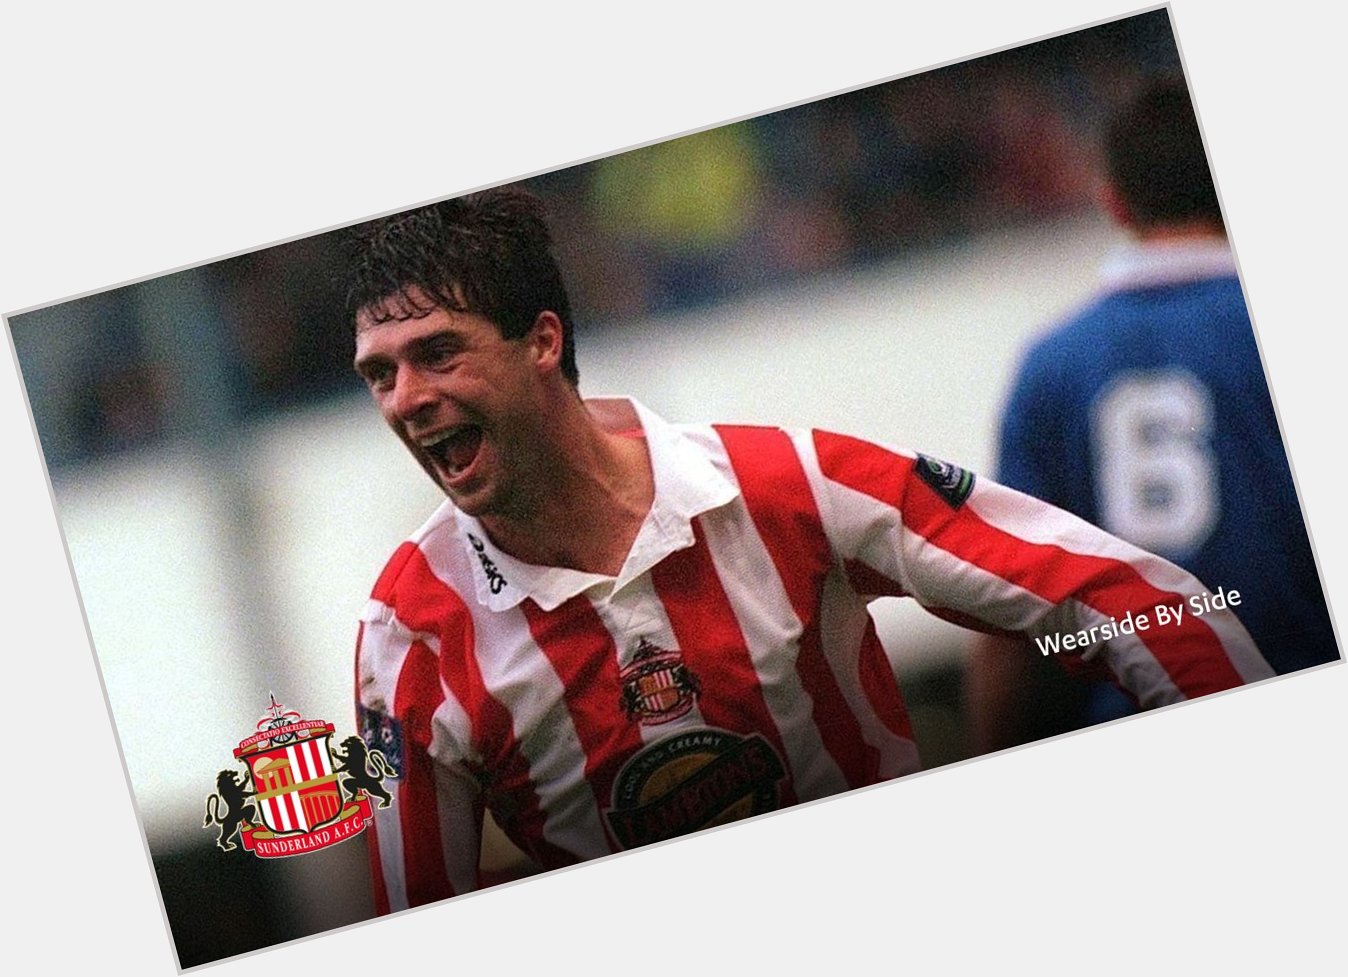  A very happy birthday to legend, Niall Quinn 